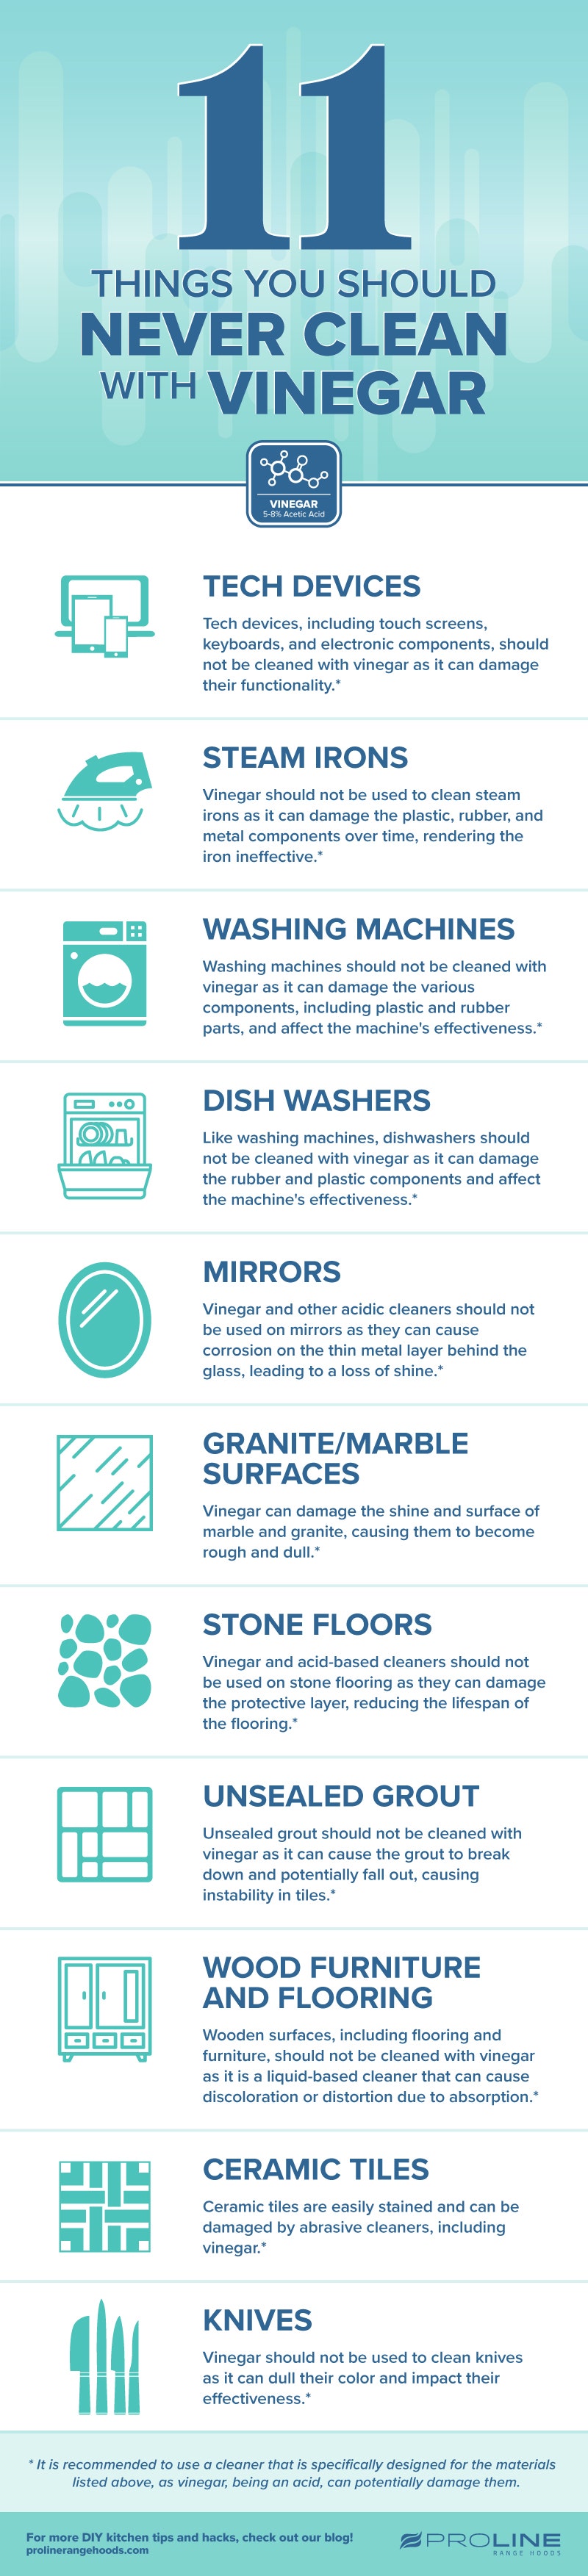 Infographic of things you should never clean with vinegar